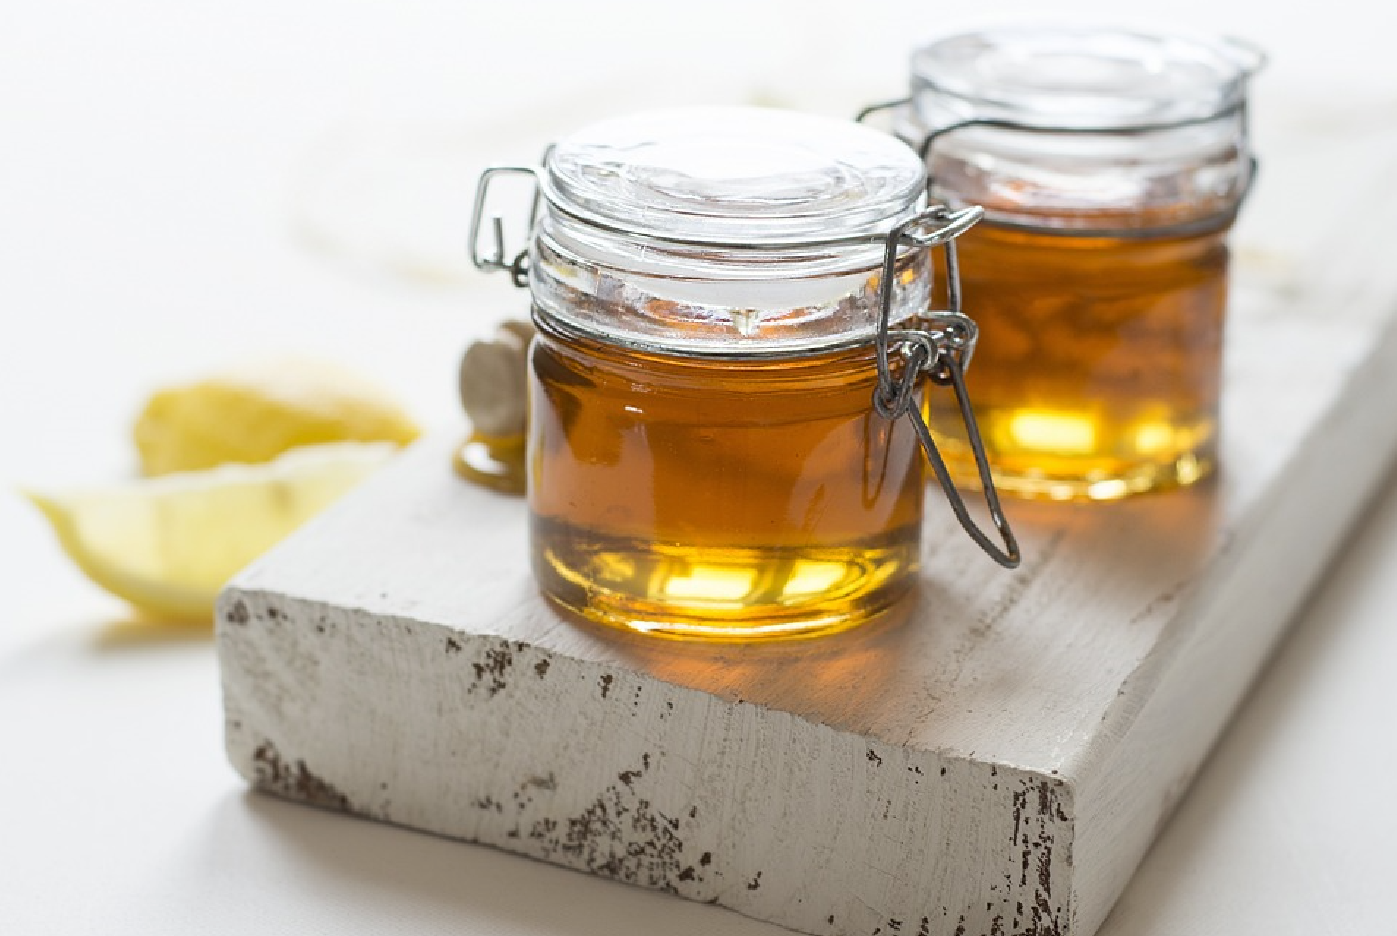 Why honey is harmful: the insidiousness of a popular antiviral